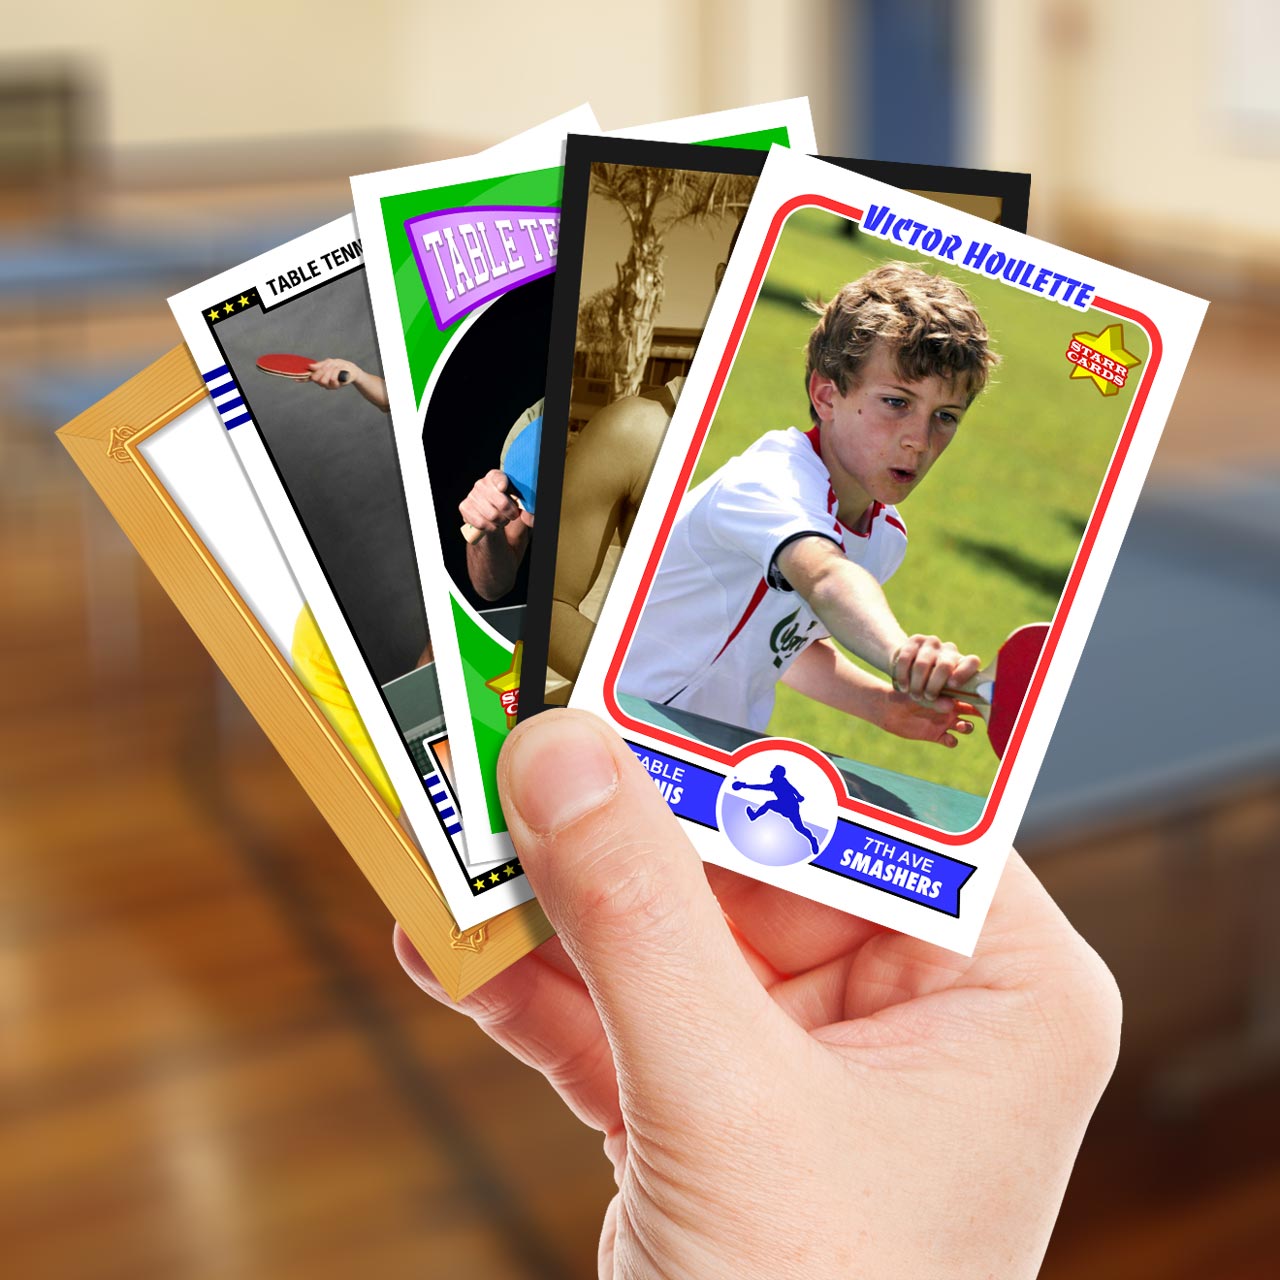 Make your own table tennis card with Starr Cards.